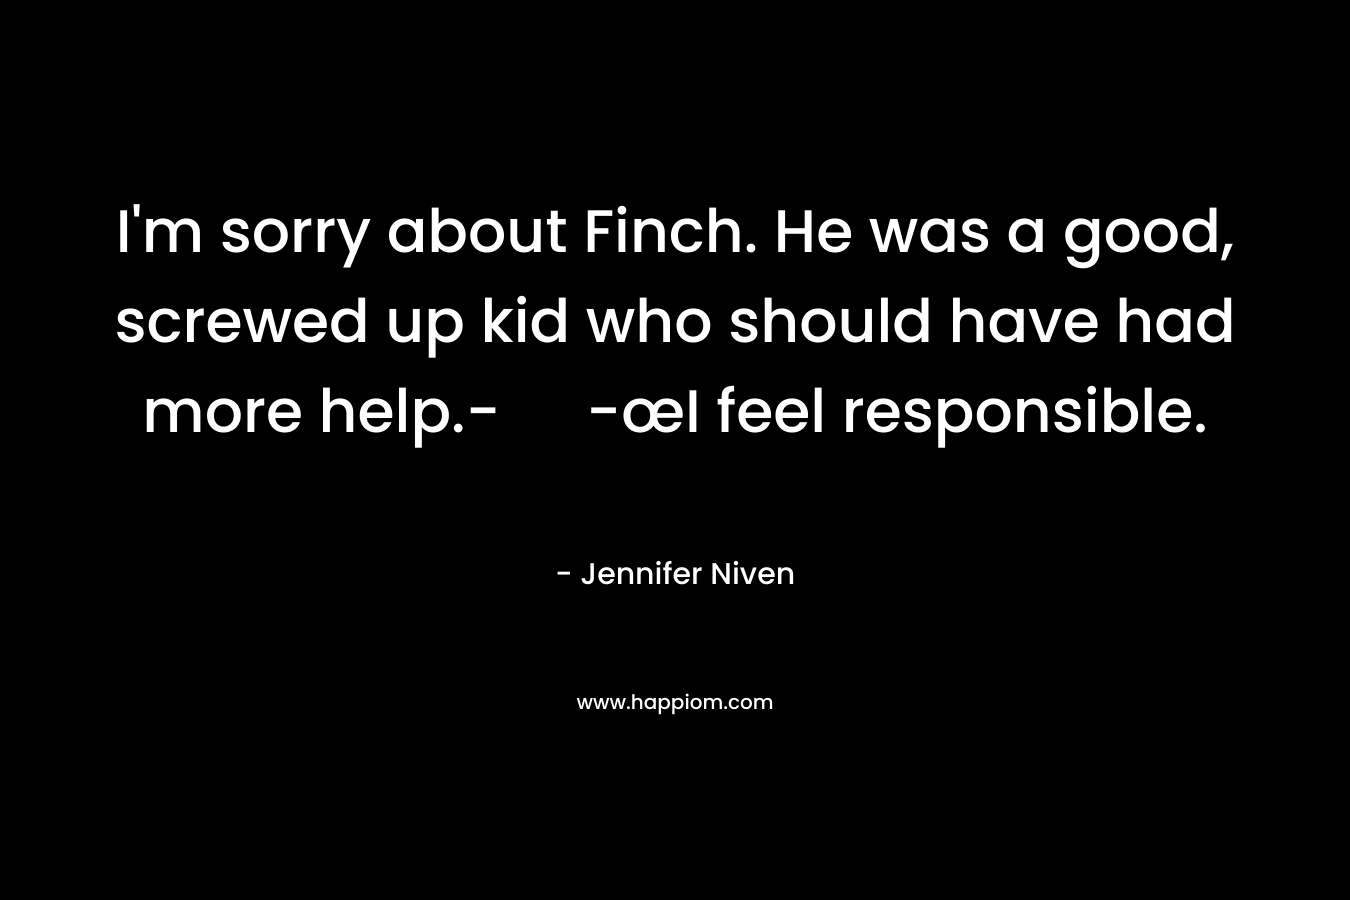 I’m sorry about Finch. He was a good, screwed up kid who should have had more help.- -œI feel responsible. – Jennifer Niven